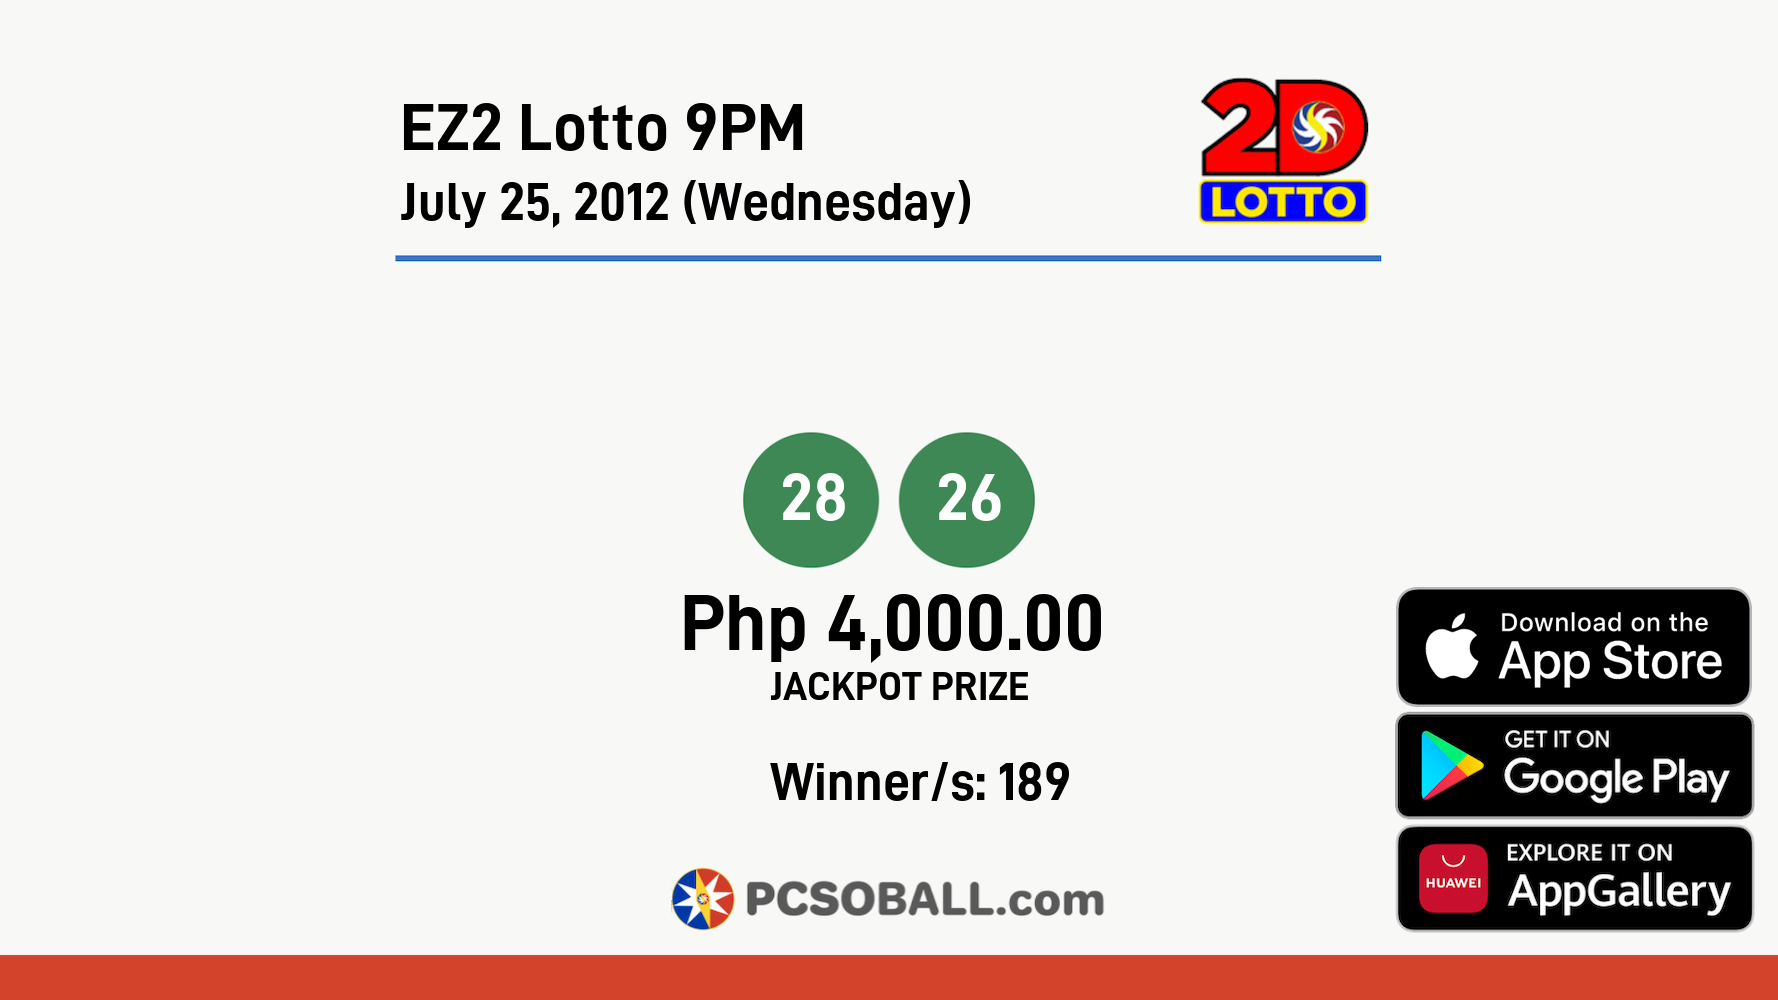 EZ2 Lotto 9PM July 25, 2012 (Wednesday) Result